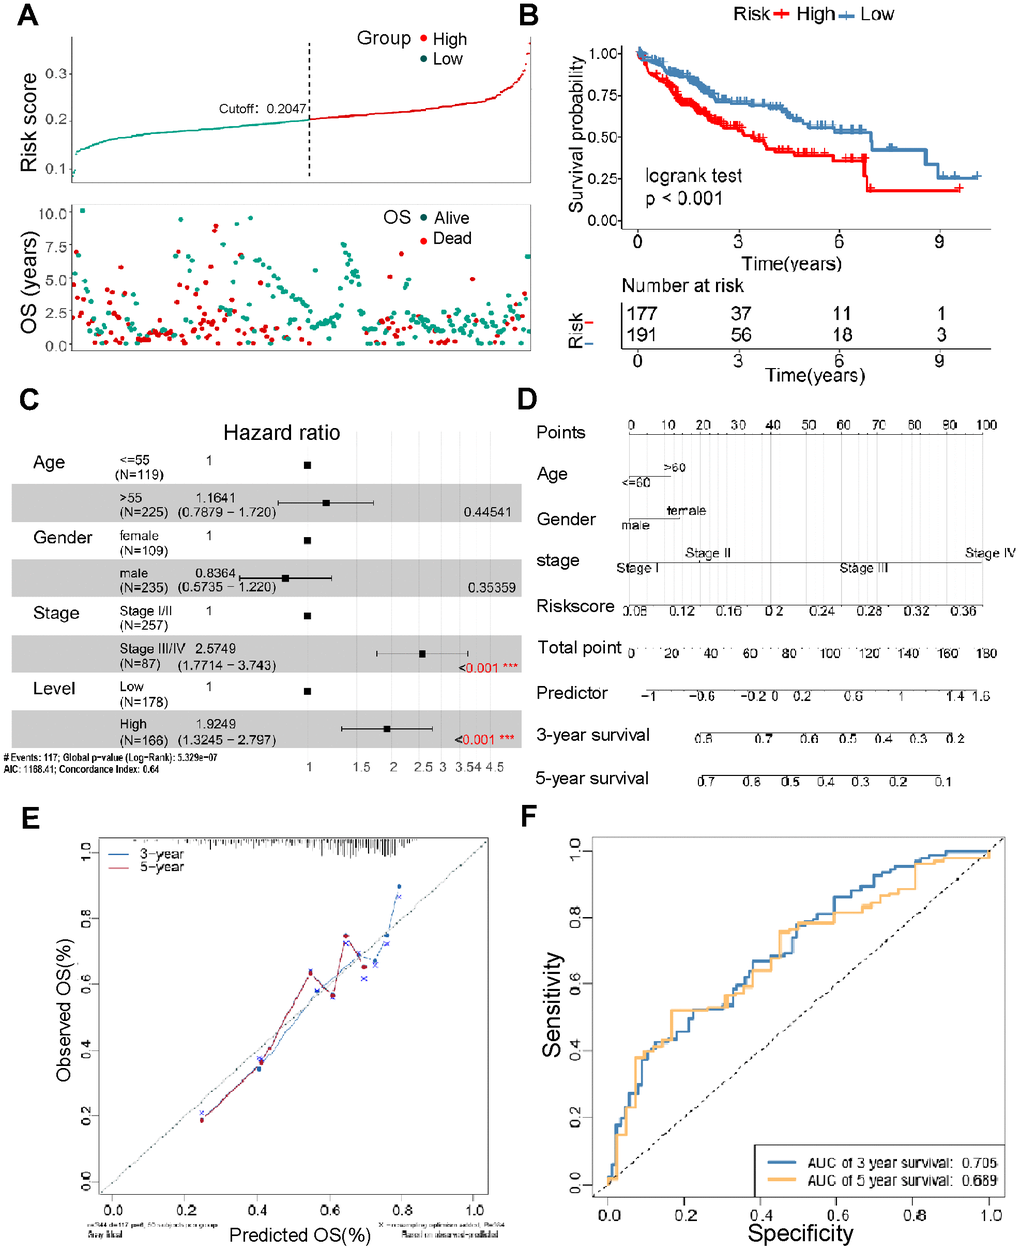 Construction of the TM4SFs-based risk score for prognostic evaluation. (A) The survival time of LIHC patients with different risk scores. (B) The survival curve for the TM4SFs-based risk score of the LIHC cohort in TCGA. (C) Multivariable Cox regression analysis demonstrated that the risk models were independent predictors of prognosis for LIHC patients. (D) A nomogram was constructed using the multivariable analysis results (age, sex, stage, and risk score) to visualize the model. (E) The calibration plots for the 3- and 5-year OS were predicted well in the TCGA cohort. (F) Time-dependent ROC curves of the risk score for predicting 3- and 5-year survival rates in the pooled HCC cohort.